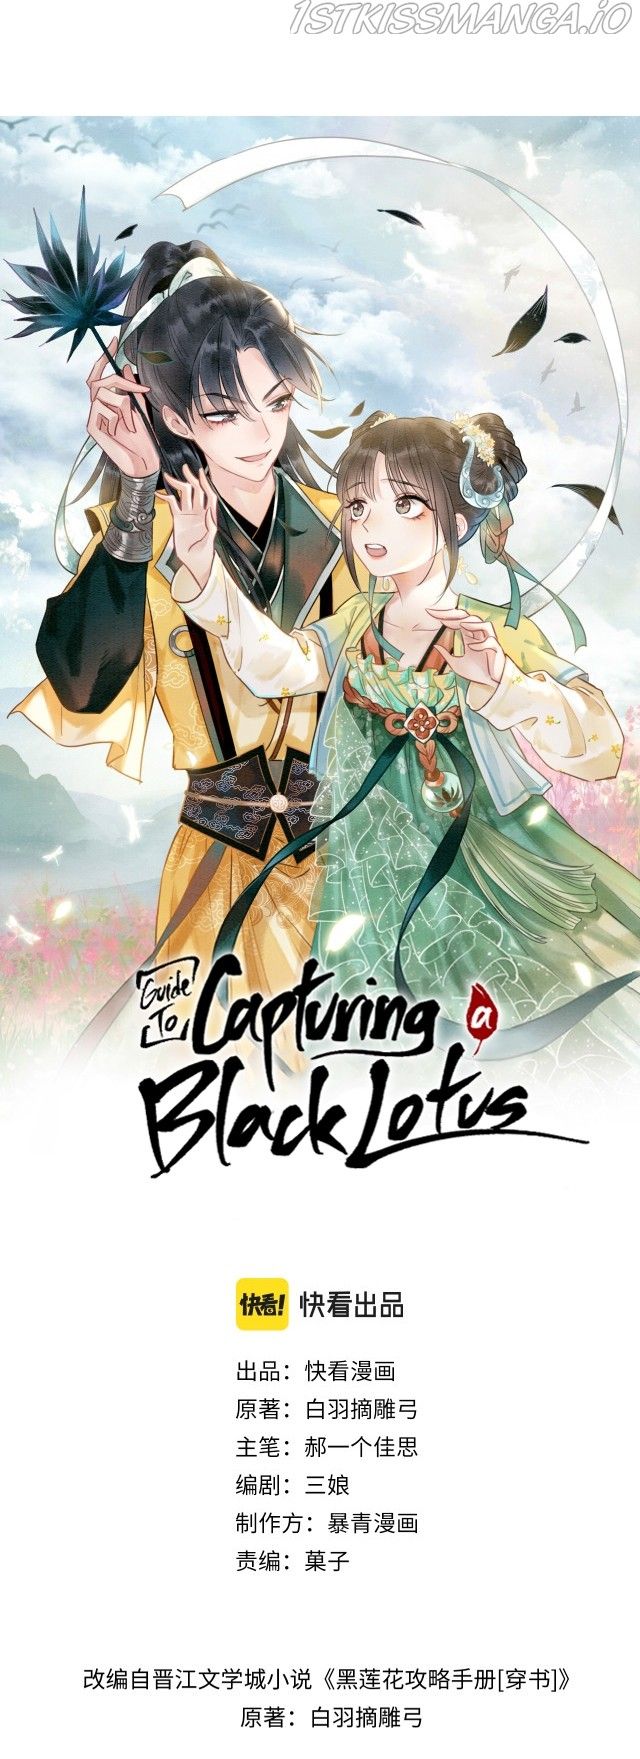 The Guide to Capturing a Black Lotus chapter 64